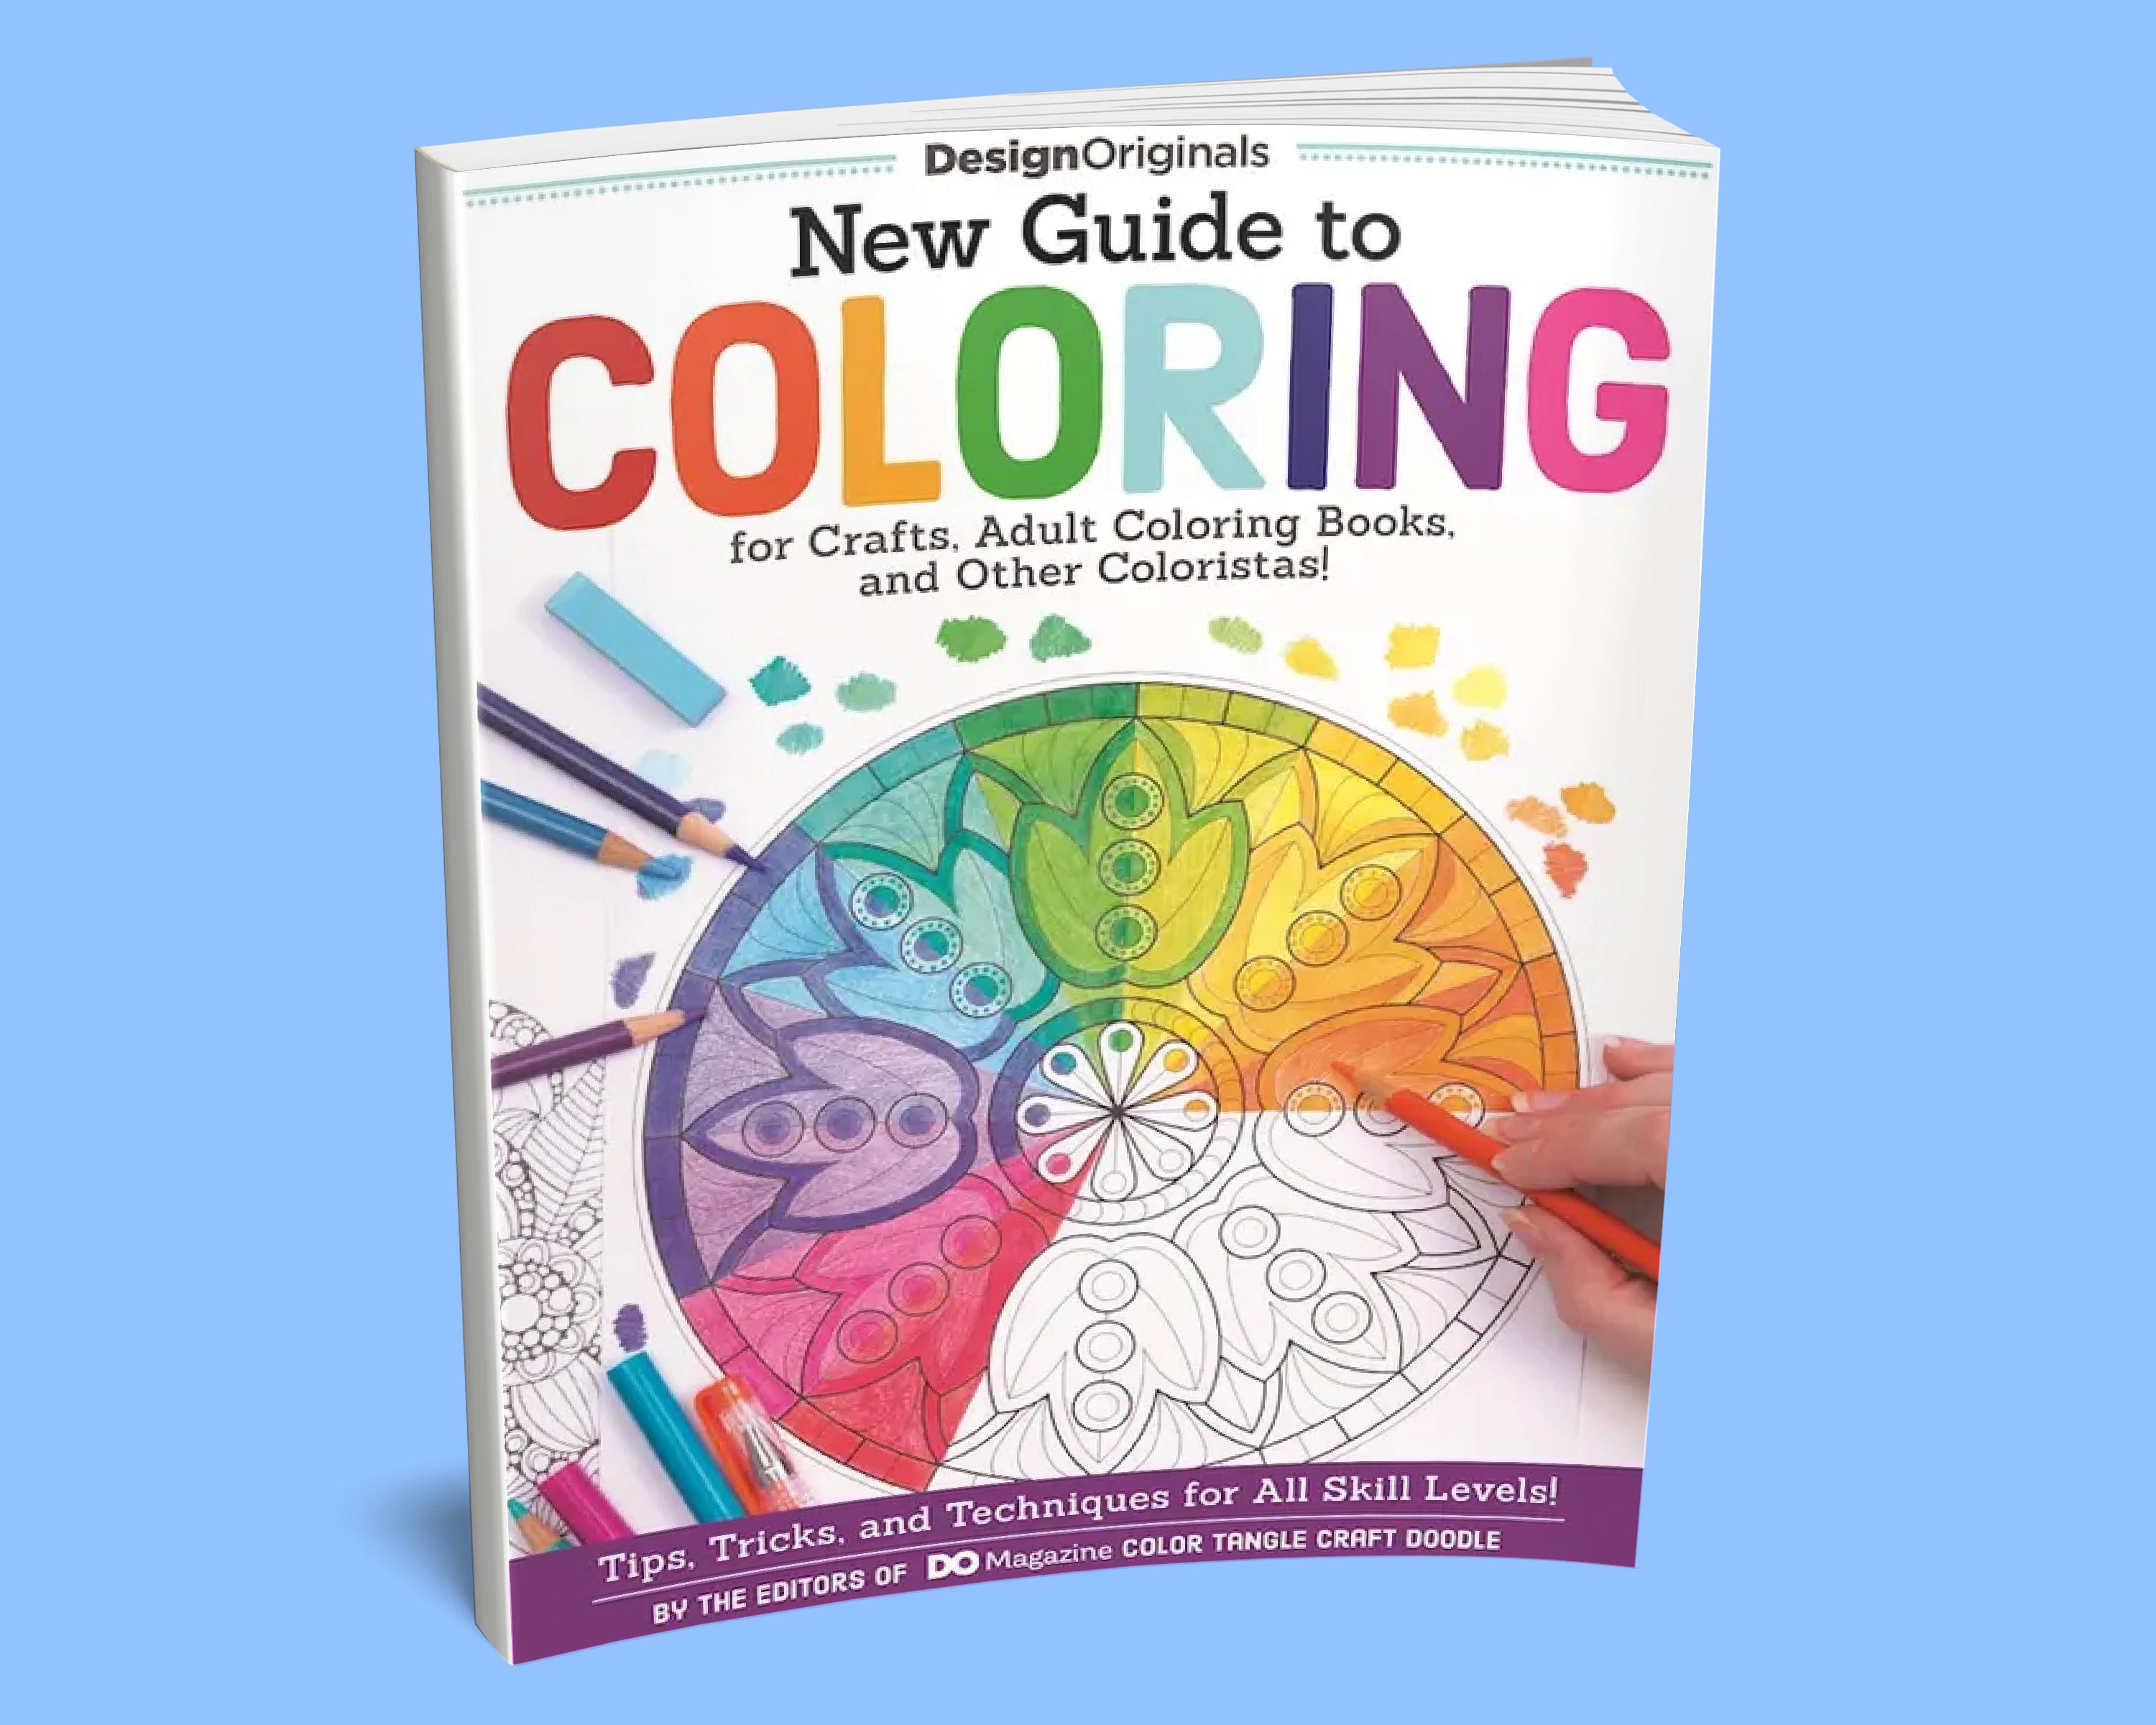 Marker Coloring Book 